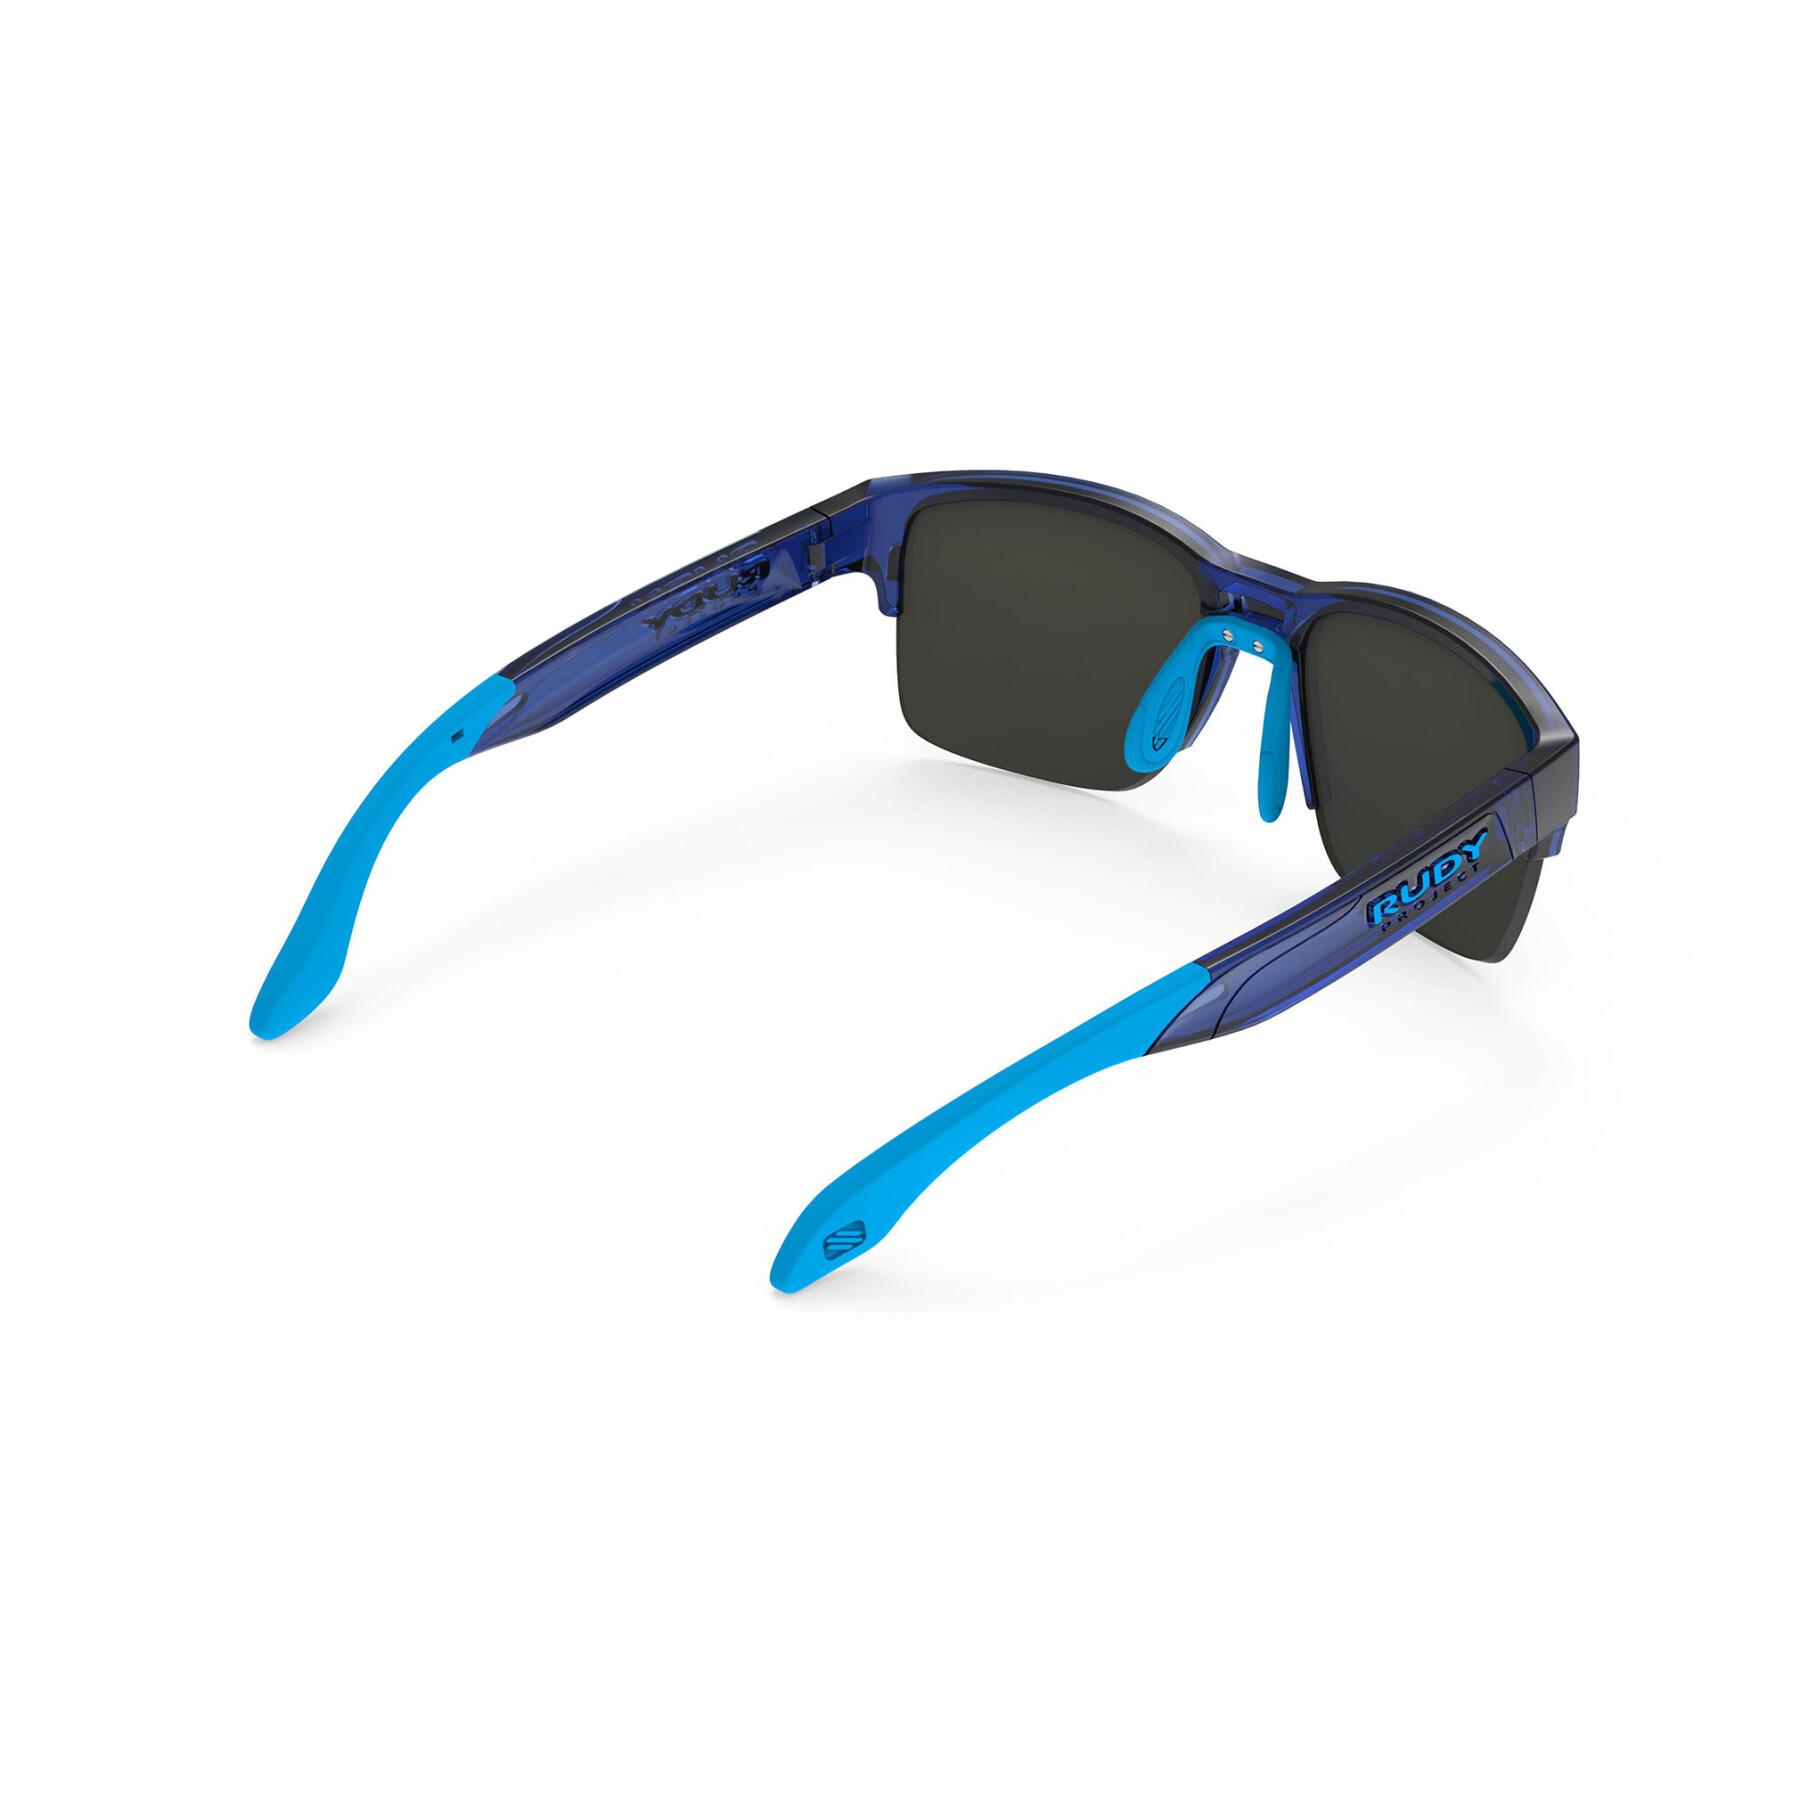 Sonnenbrille Rudy Project spinair 58